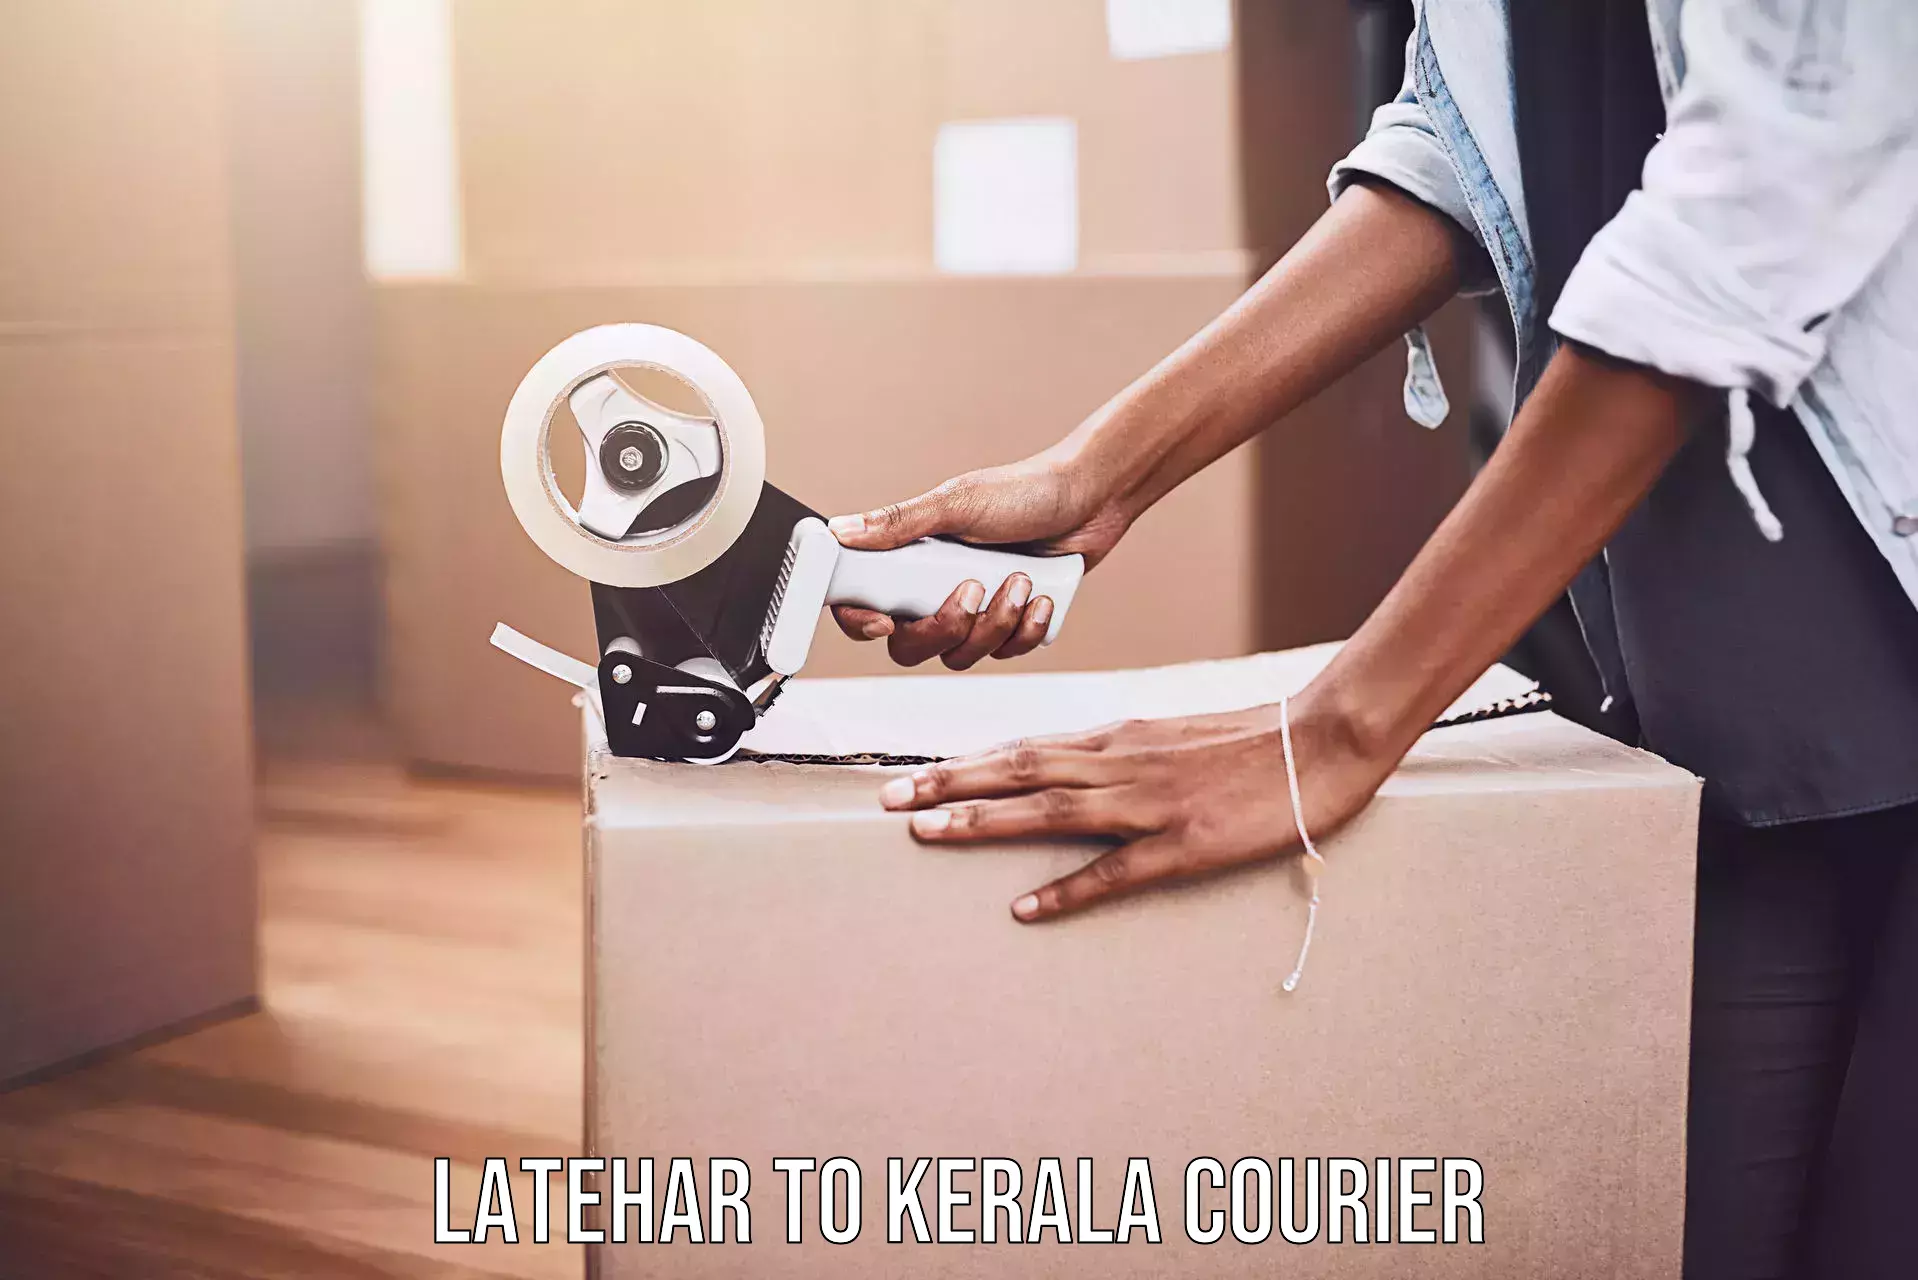 On-call courier service Latehar to Kerala